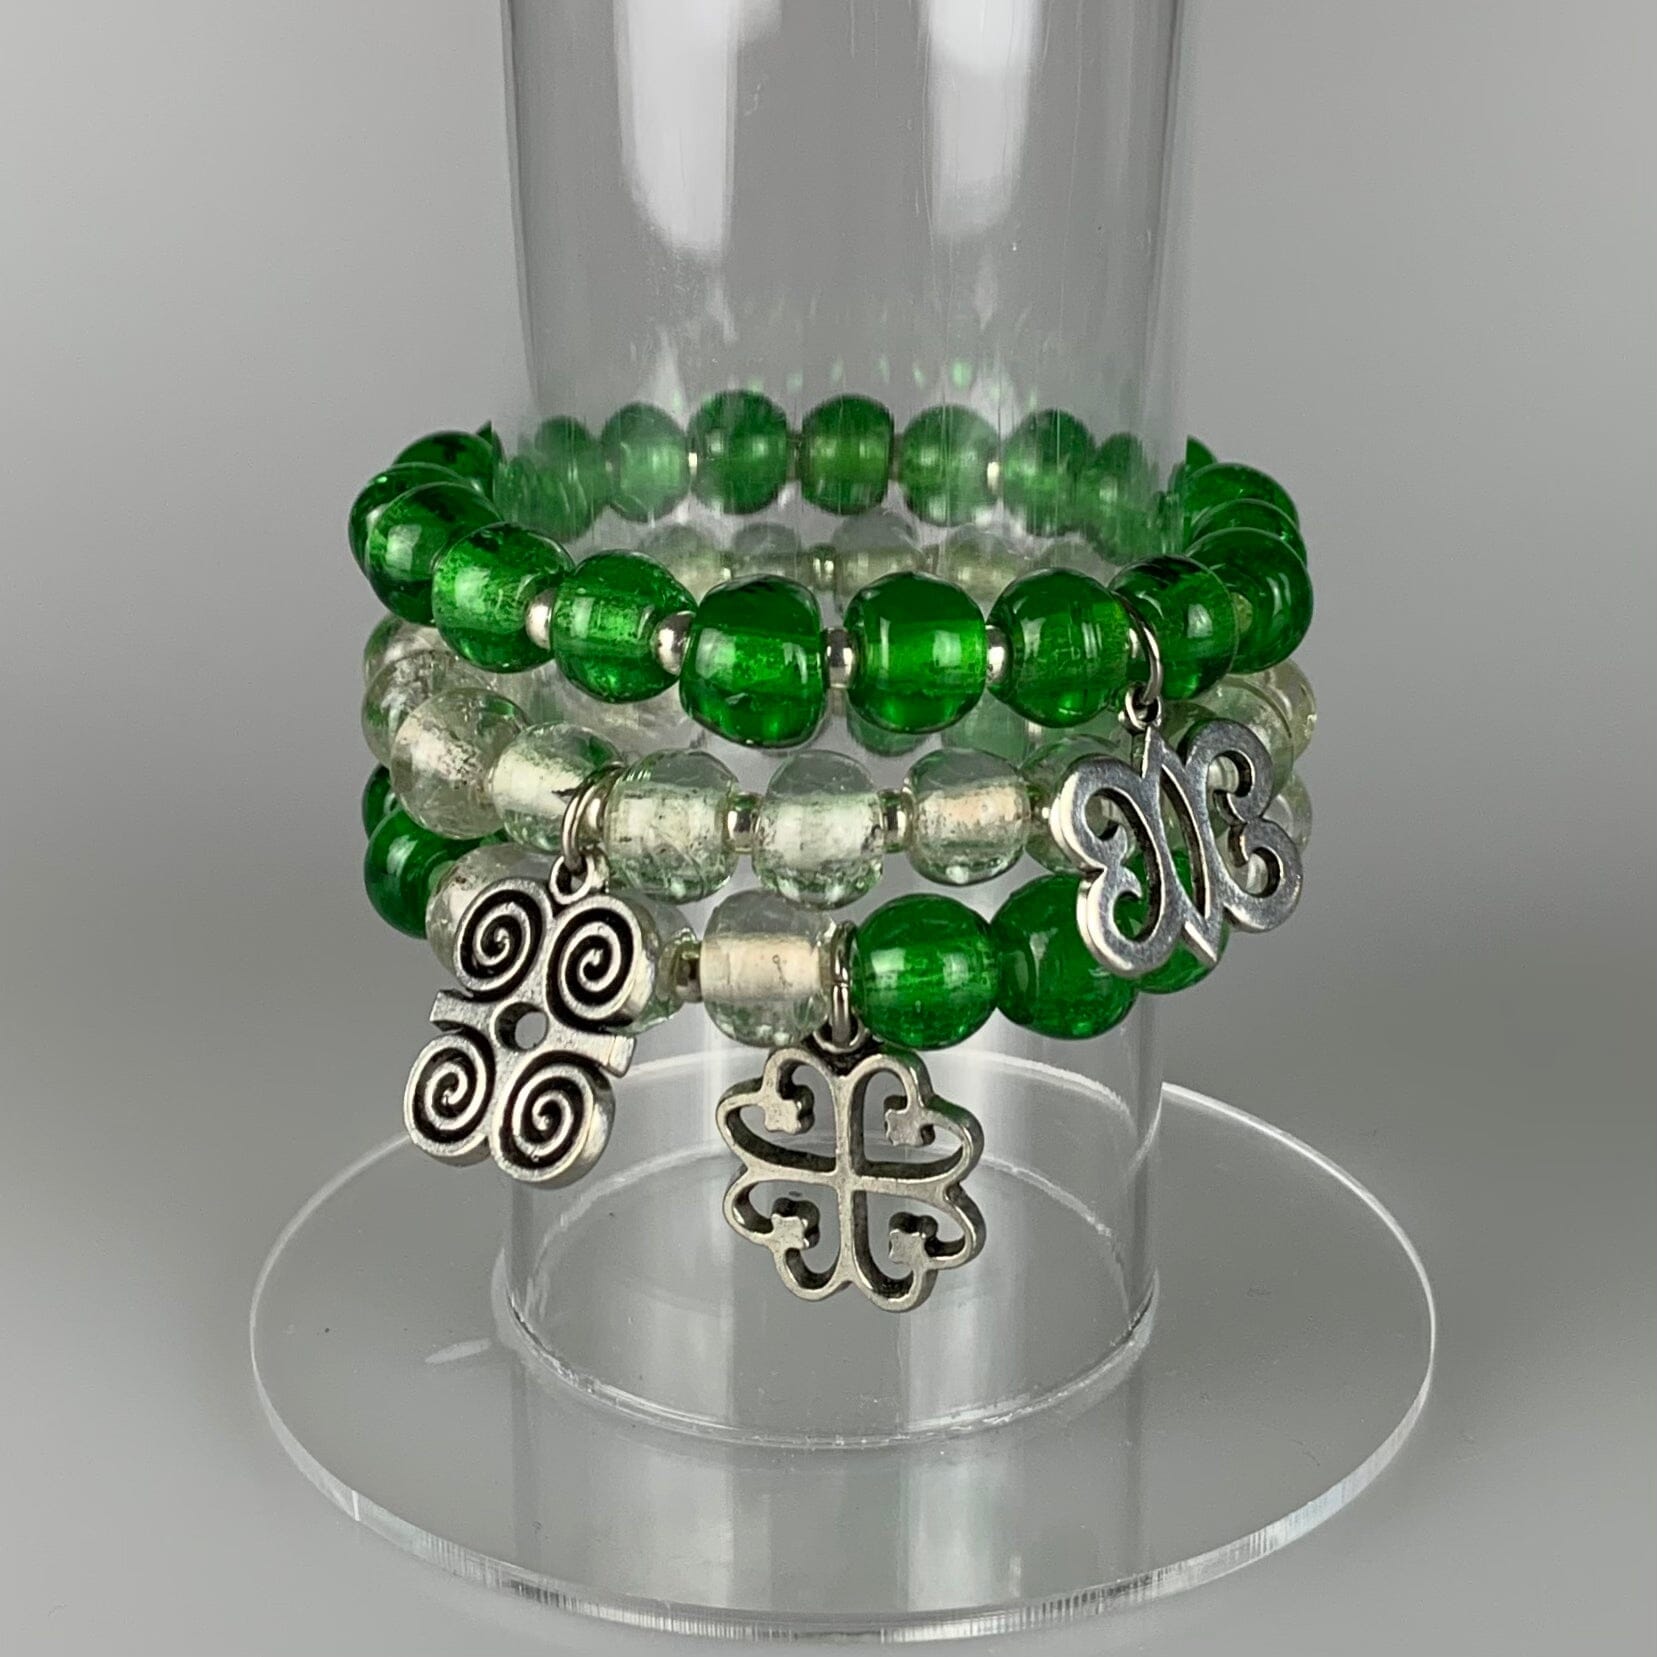 ME™ Recycled Glass Nyame Dua 7-inch Charm Bracelet Women's Bracelets Show Your Africa 